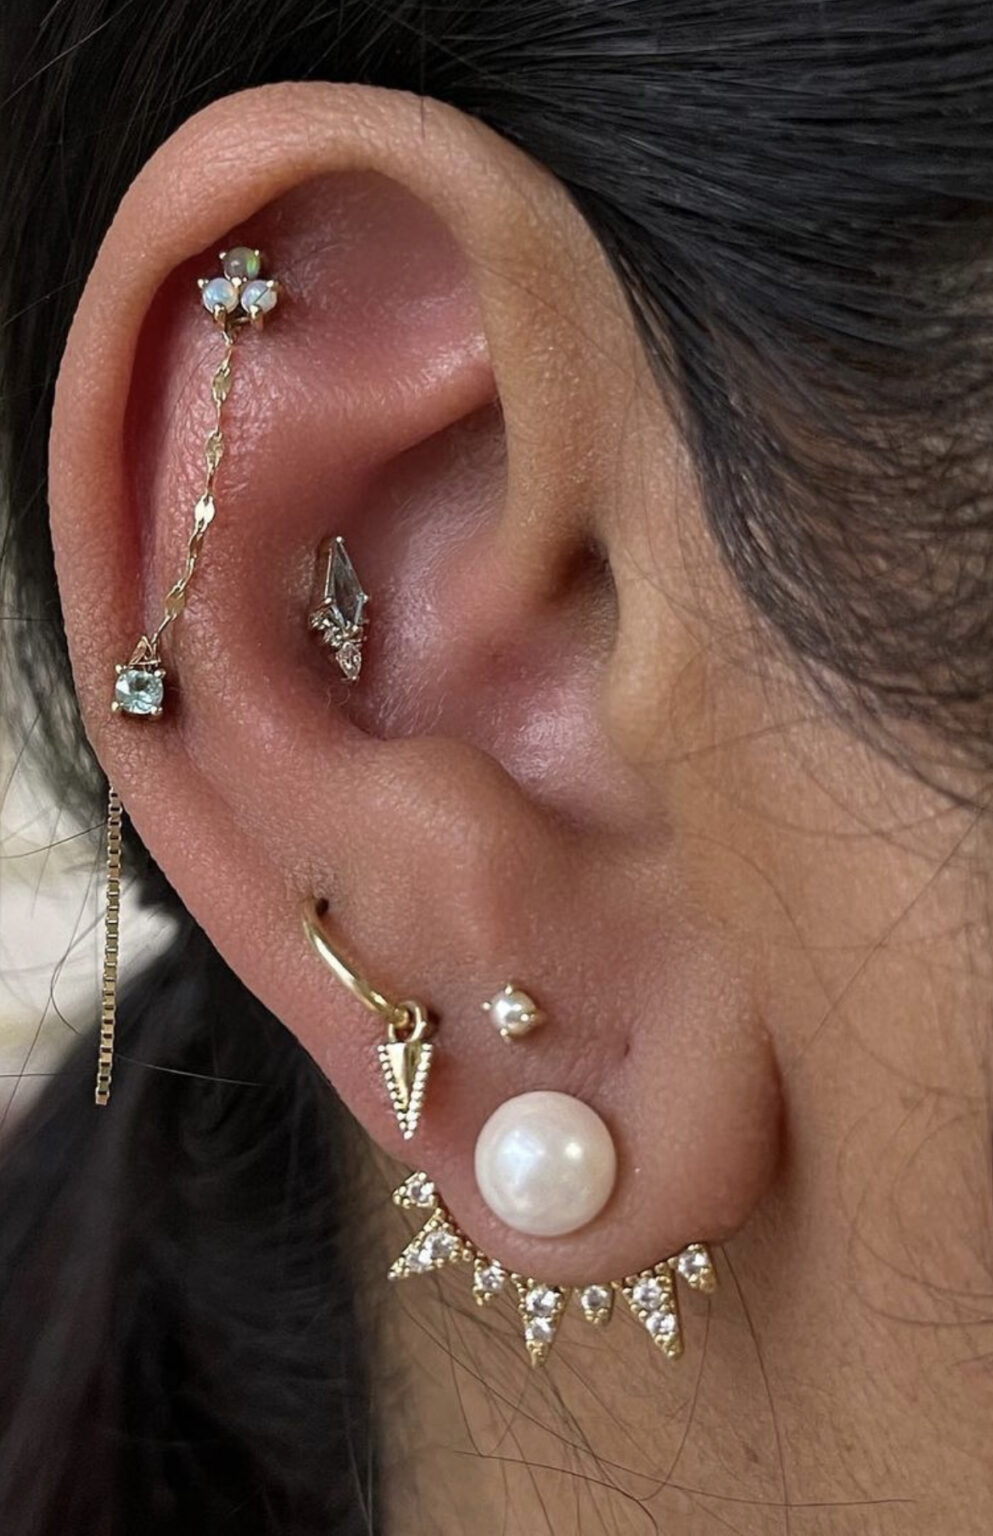 20+ Types of Ear Piercings: How To Choose - Organic Beauty Lover